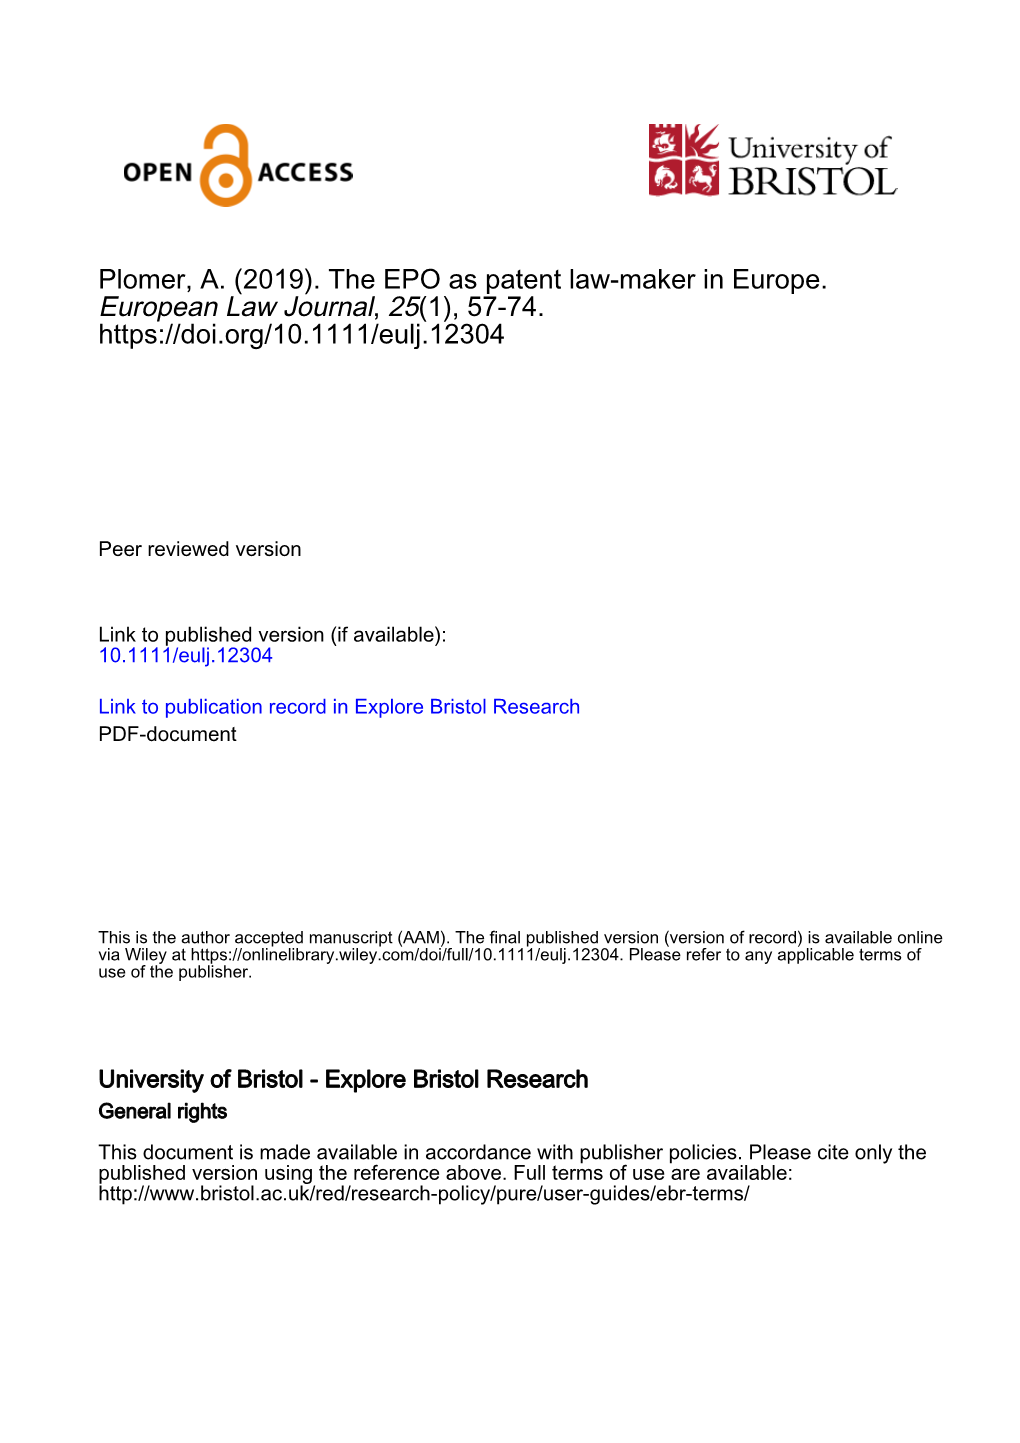 Plomer, A. (2019). the EPO As Patent Law‐Maker in Europe. European Law Journal, 25(1), 57-74